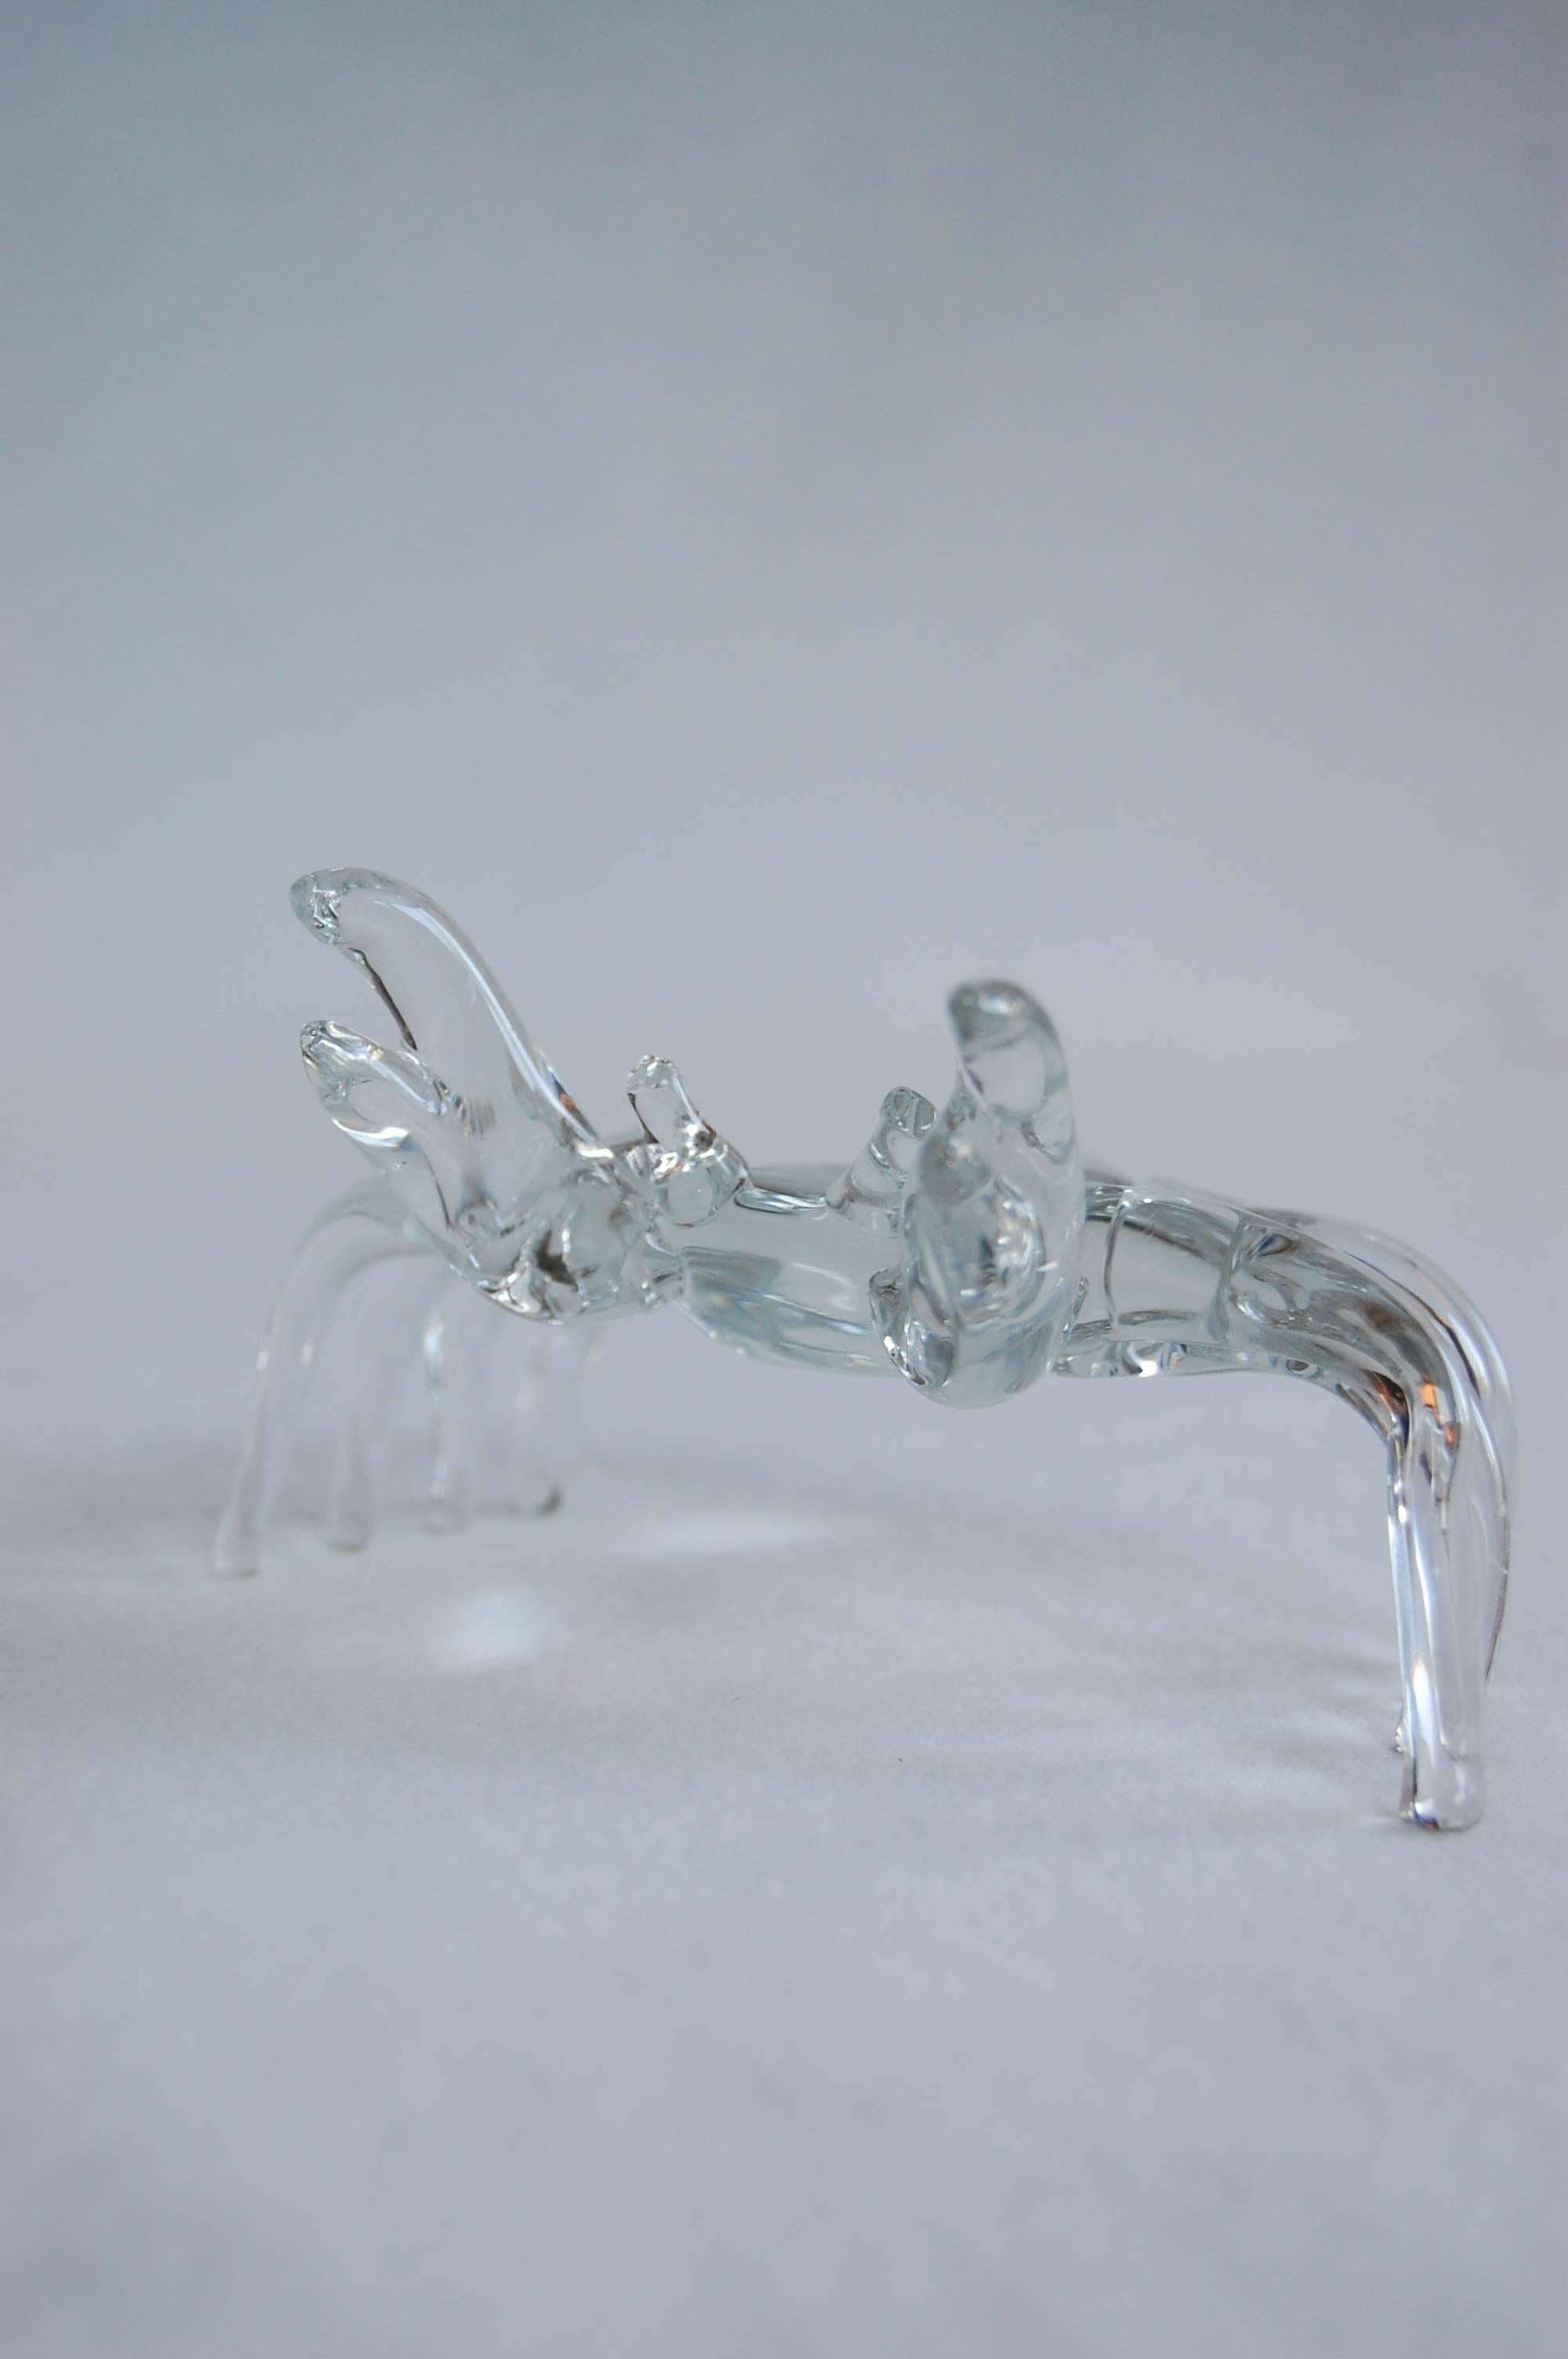 20th Century Modern Handmade Clear Glass Figure of a Sand Crab